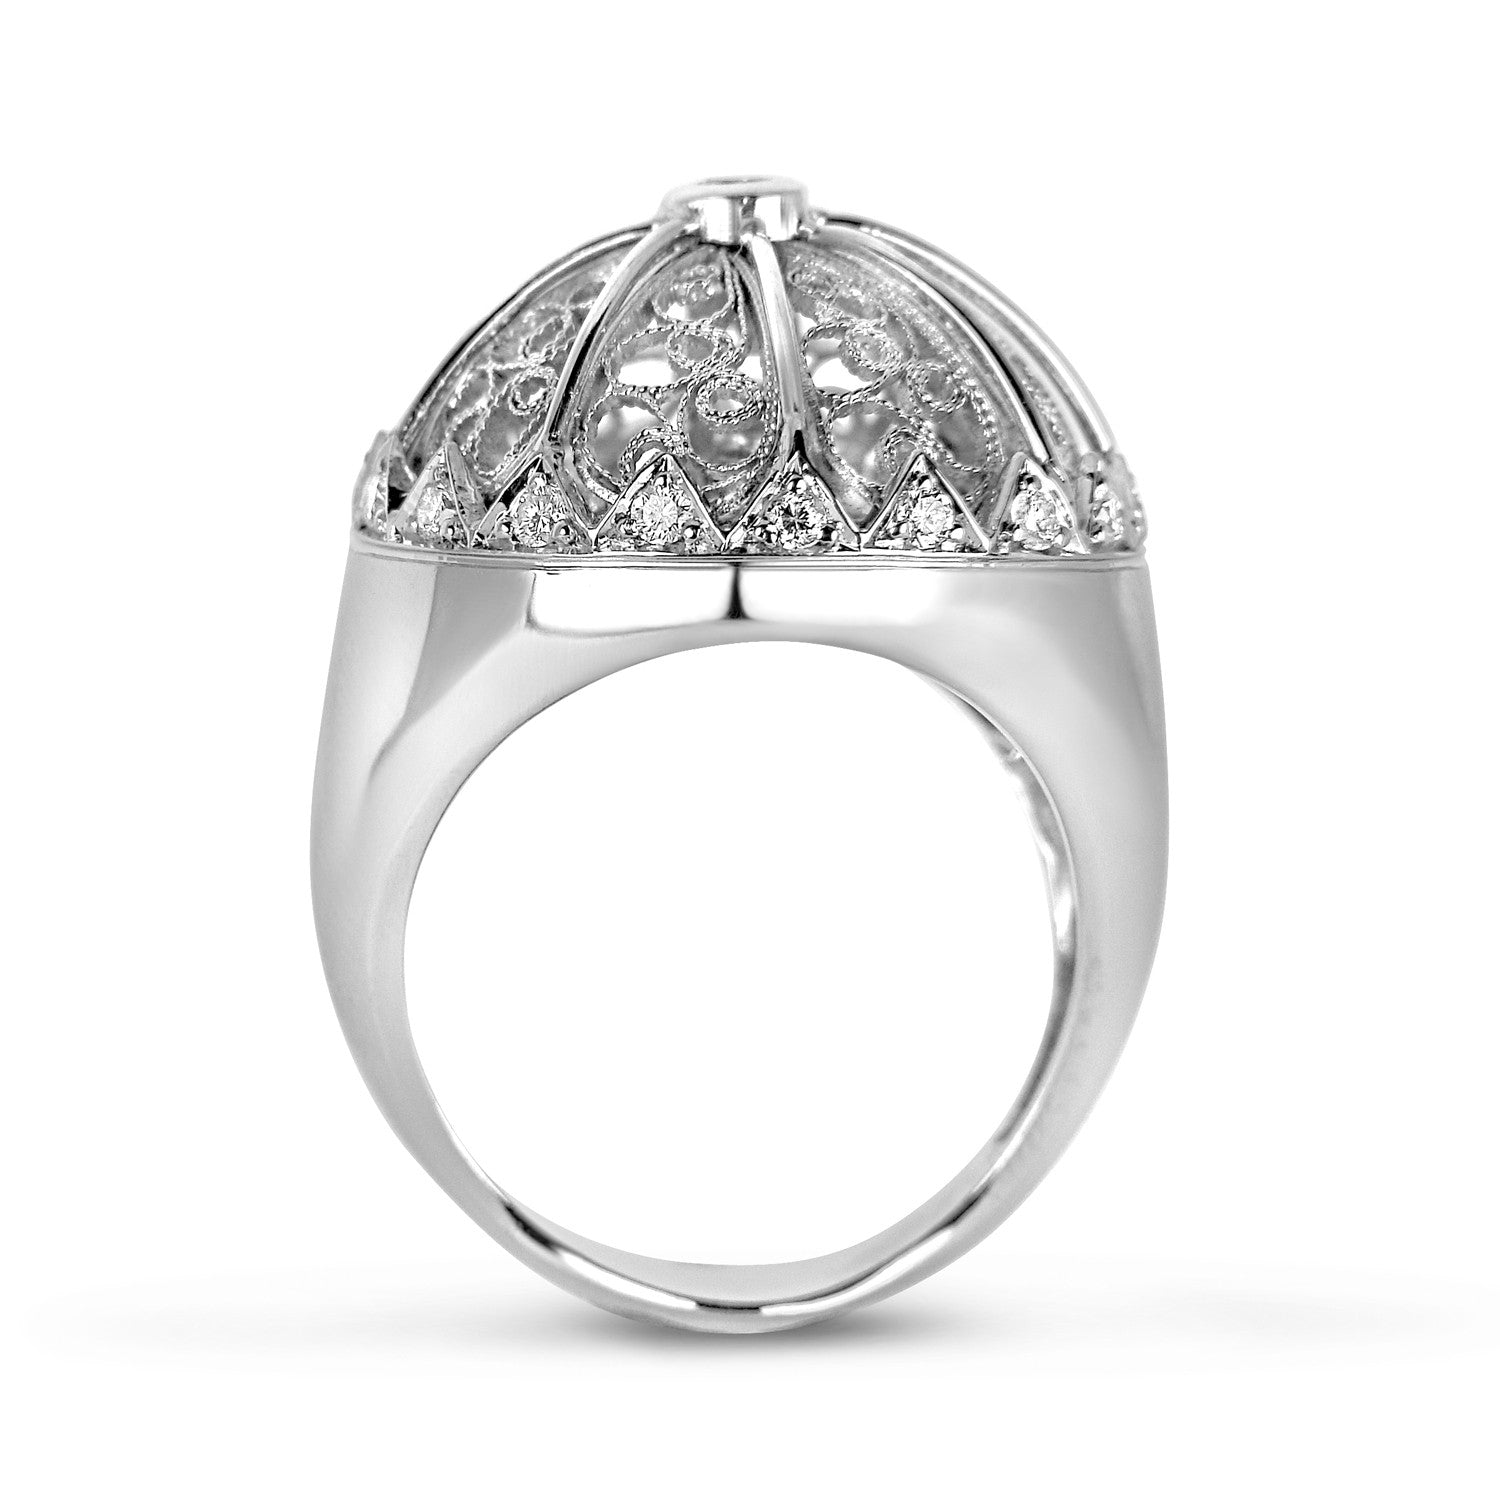 Bespoke Debbie filigree ring - 18ct recycled white gold and the client's old diamonds